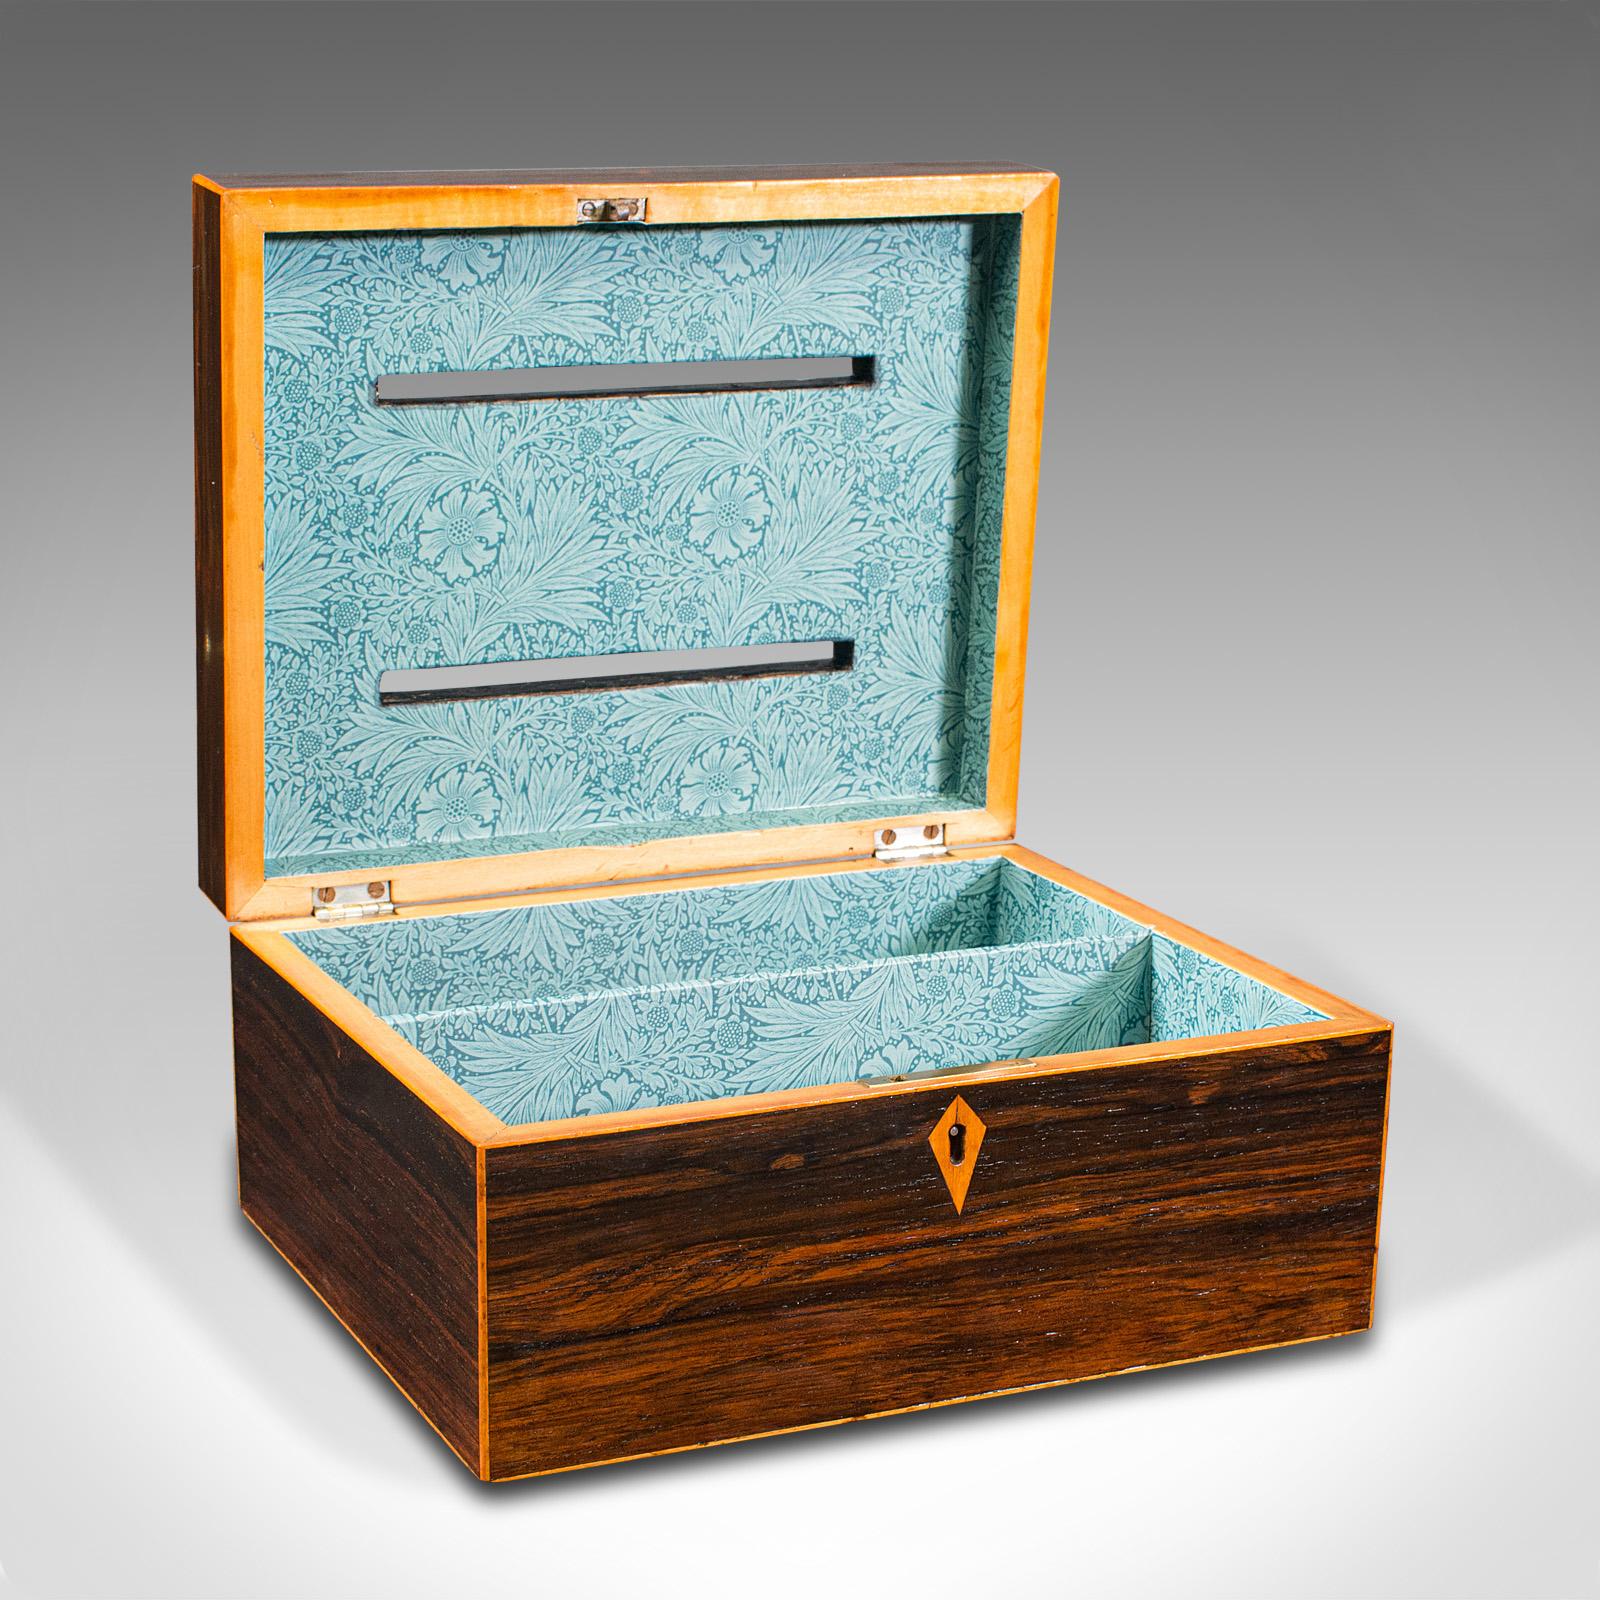 This is an antique ballot box. An English, rosewood and boxwood inlaid voting or post box, dating to the late Victorian period, circa 1900.

Superb quality ballot box with striking finish
Displays a desirable aged patina and in good order
Select